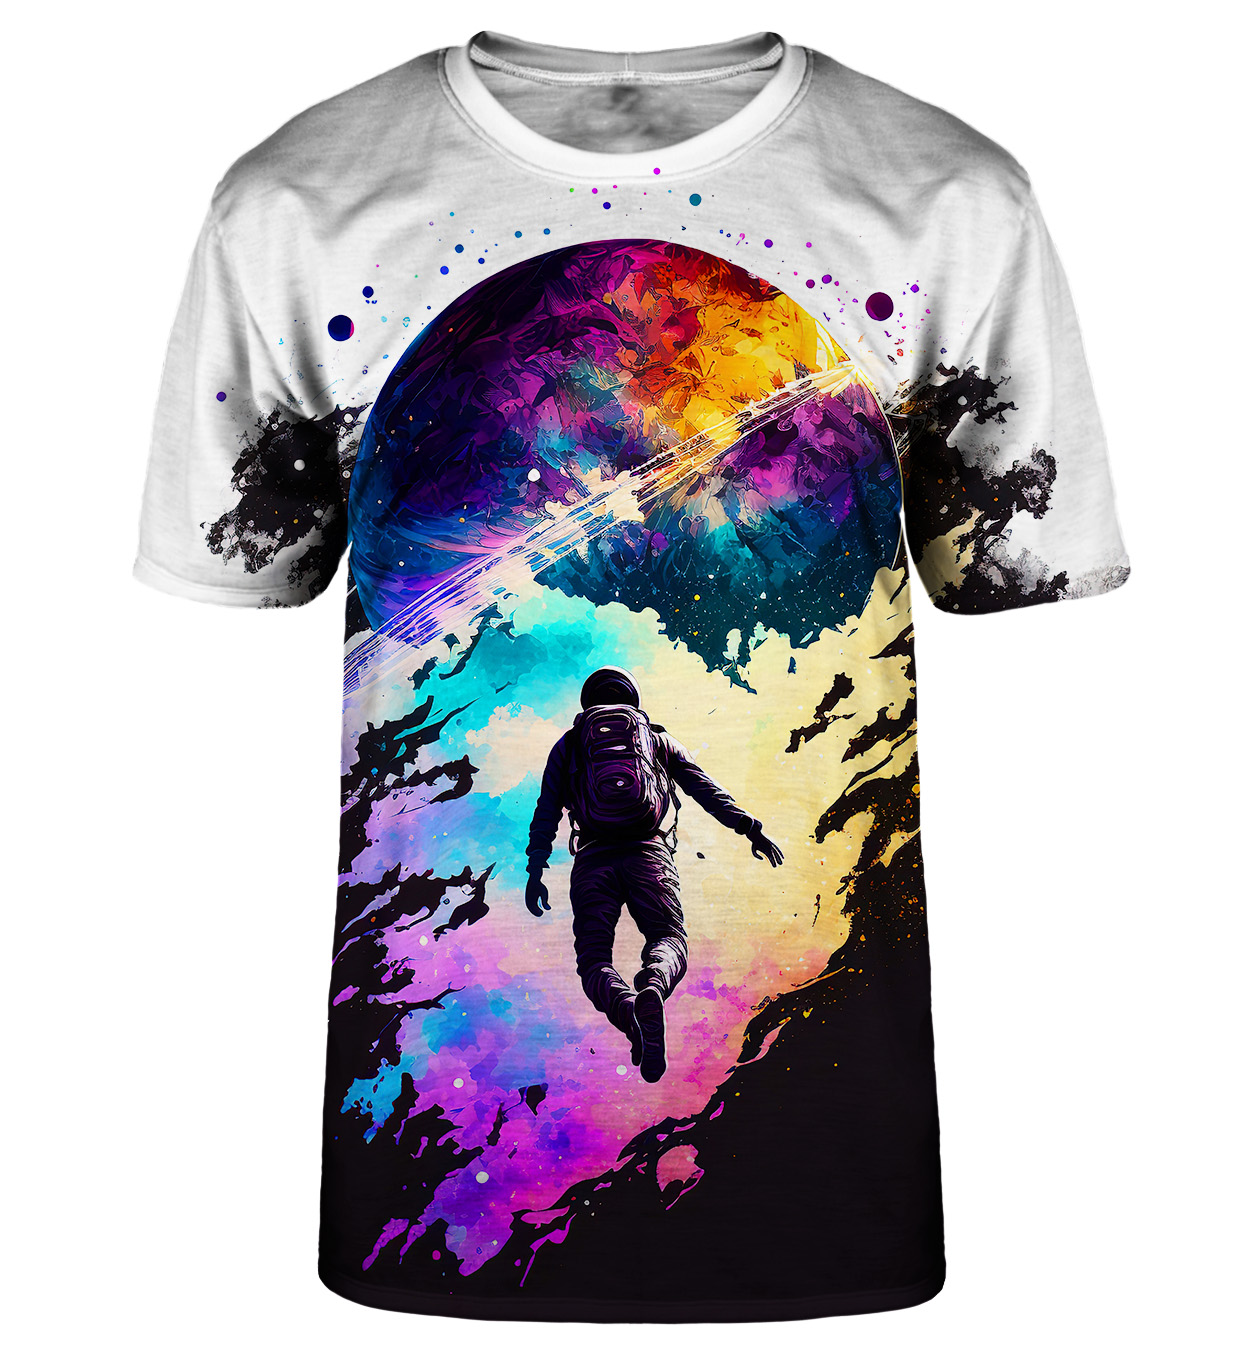 Searching for Colors T-shirt - XL